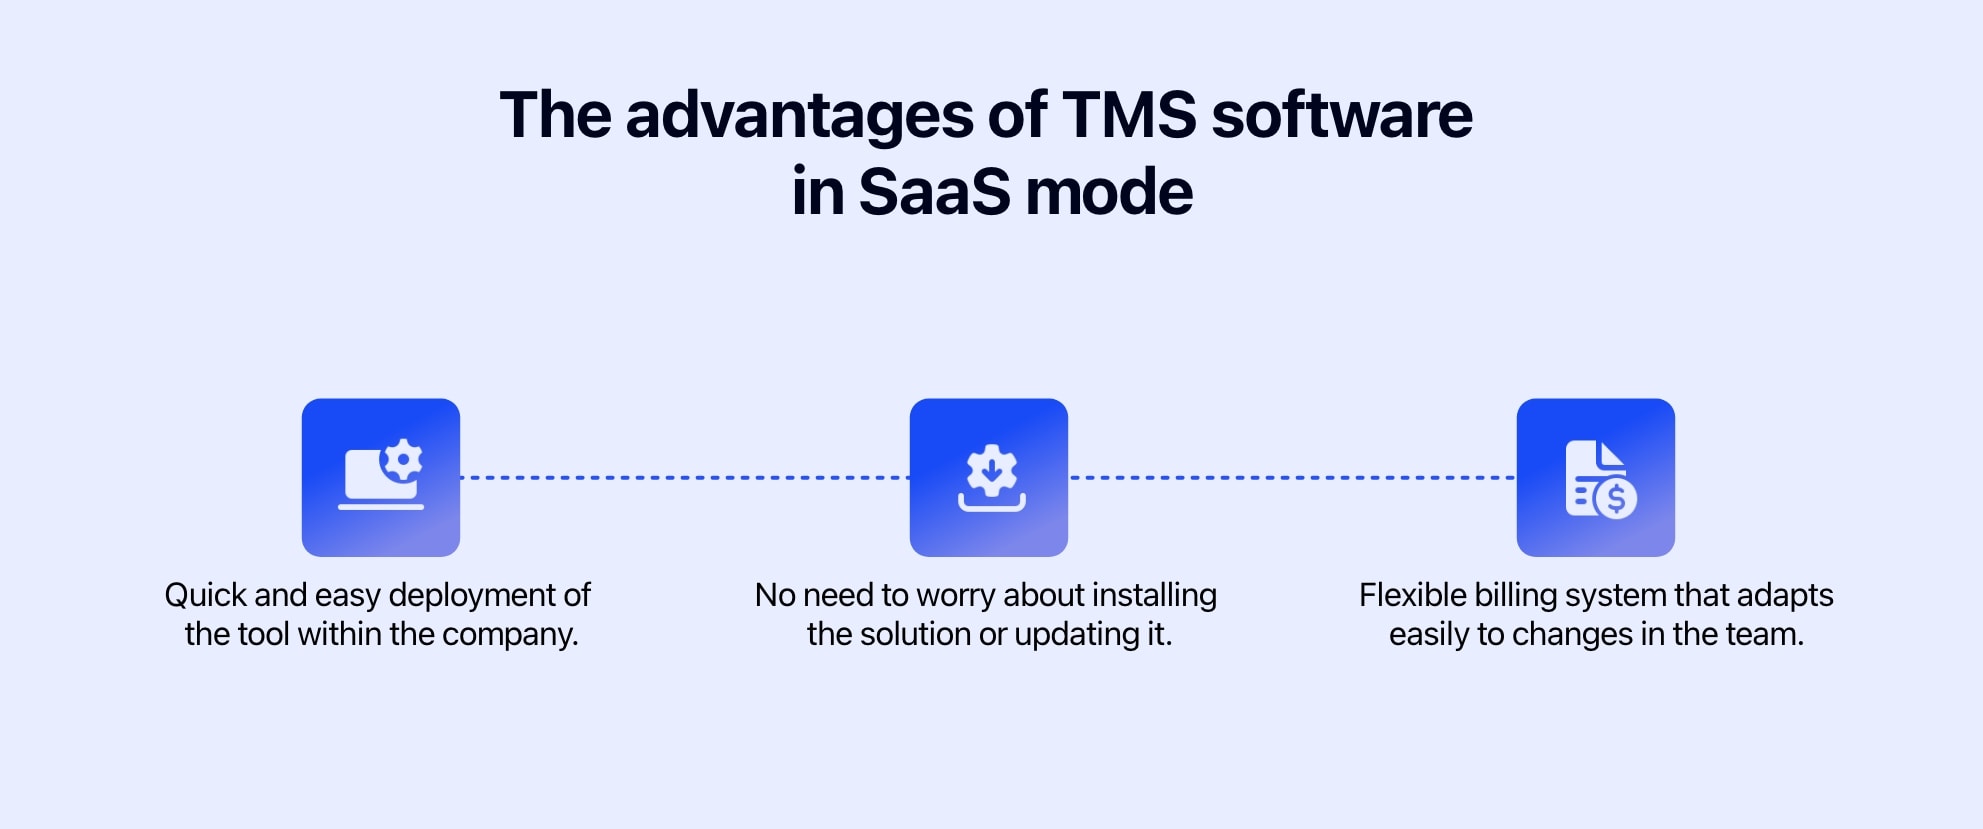 Diagram showing the advantages of TMS software in SaaS mode.